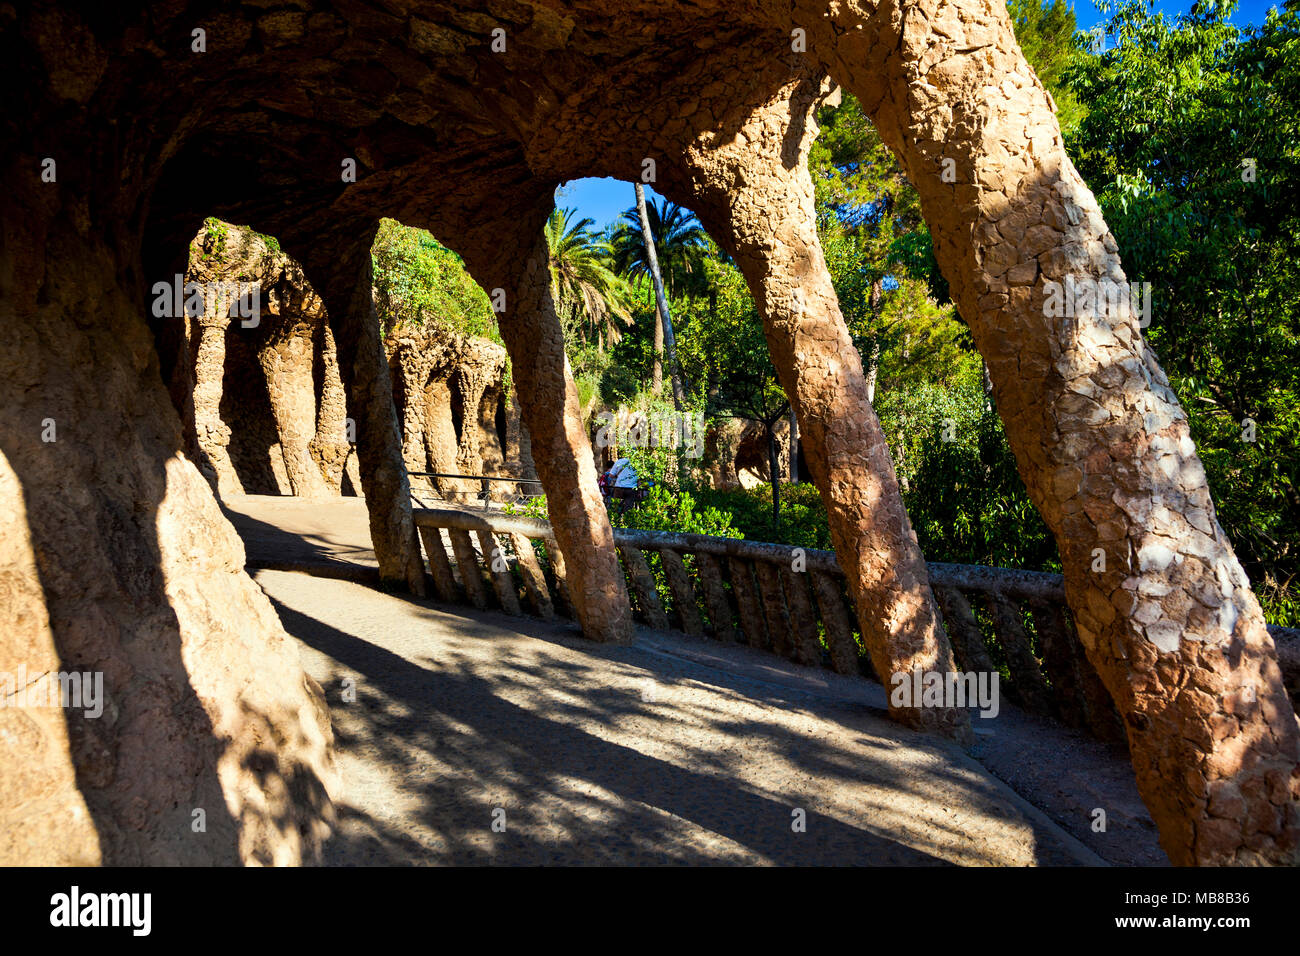 The viaduct at the Gaudi architecture at Park Güell in Barcelona, Spain Stock Photo